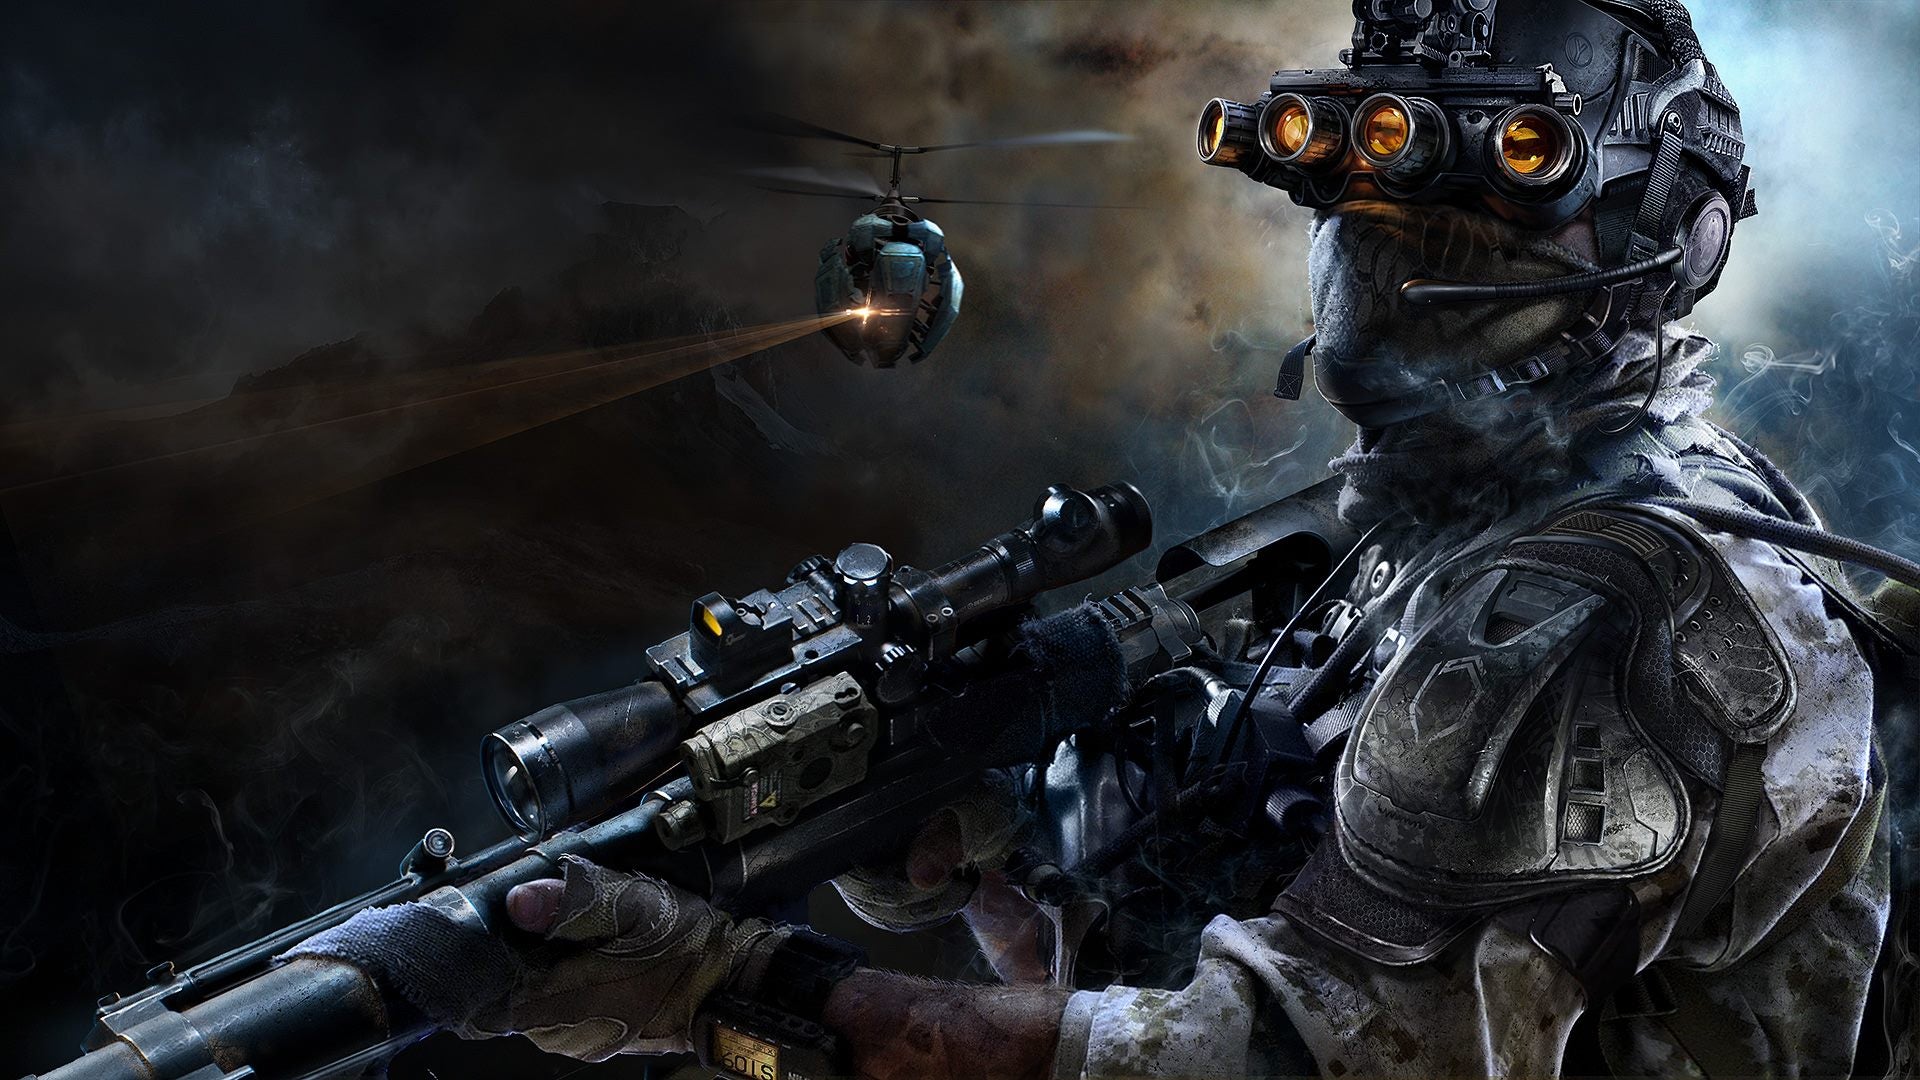 Image for Sniper: Ghost Warrior 3 pushed back to January 2017